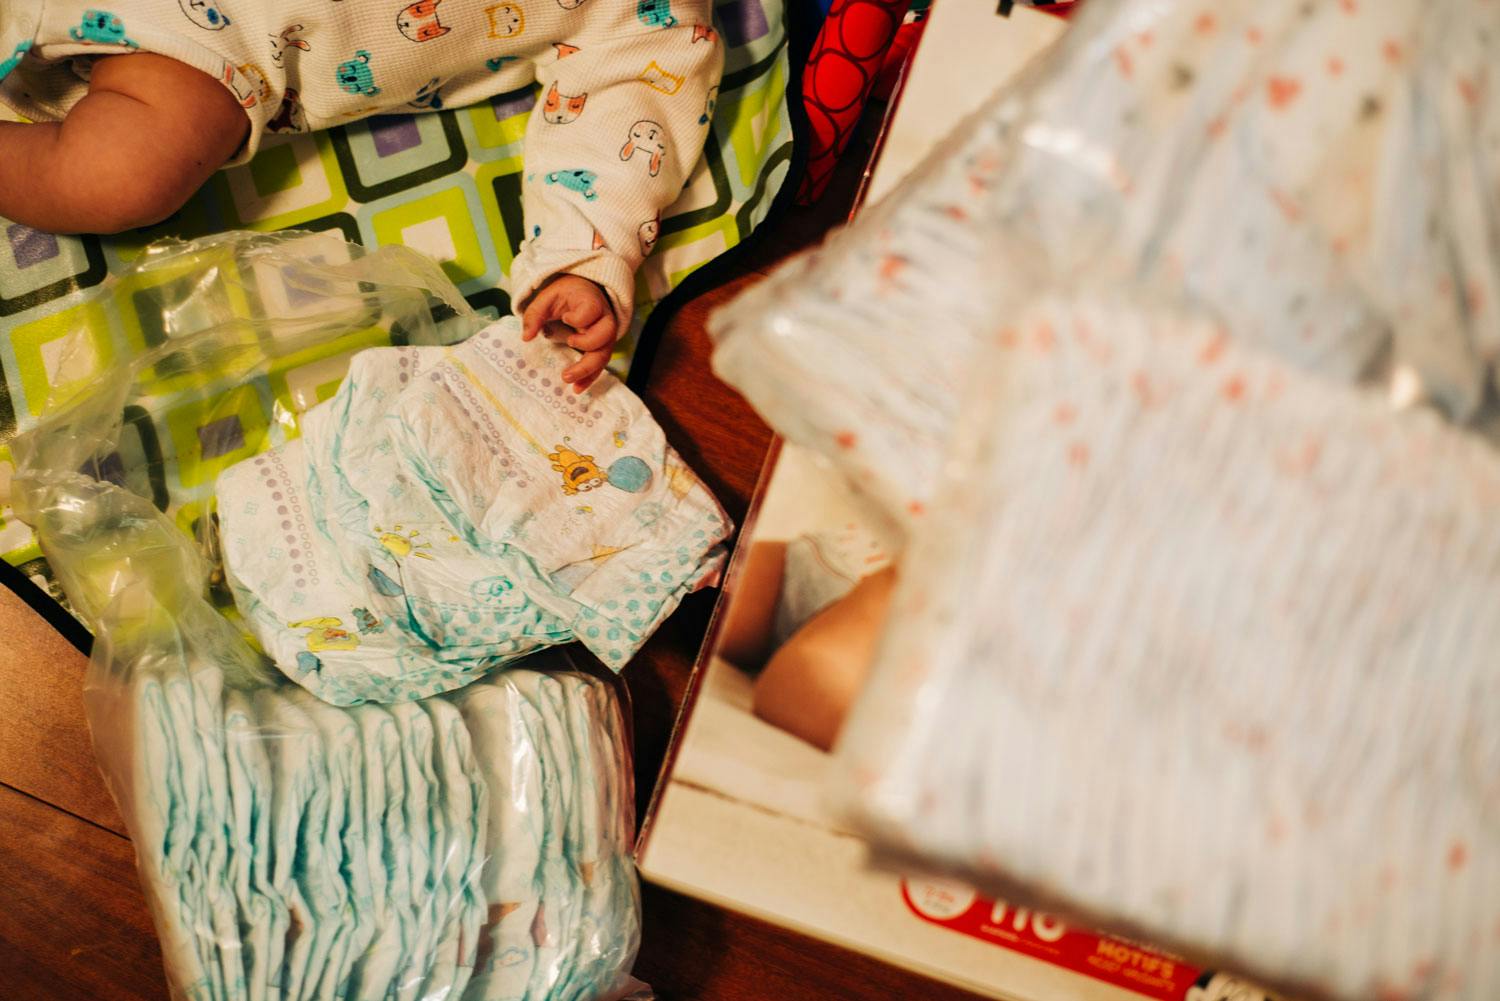 An infant wearing a onesie patterned with animal faces lies on a table beside a plastic bag of folded disposable diapers.